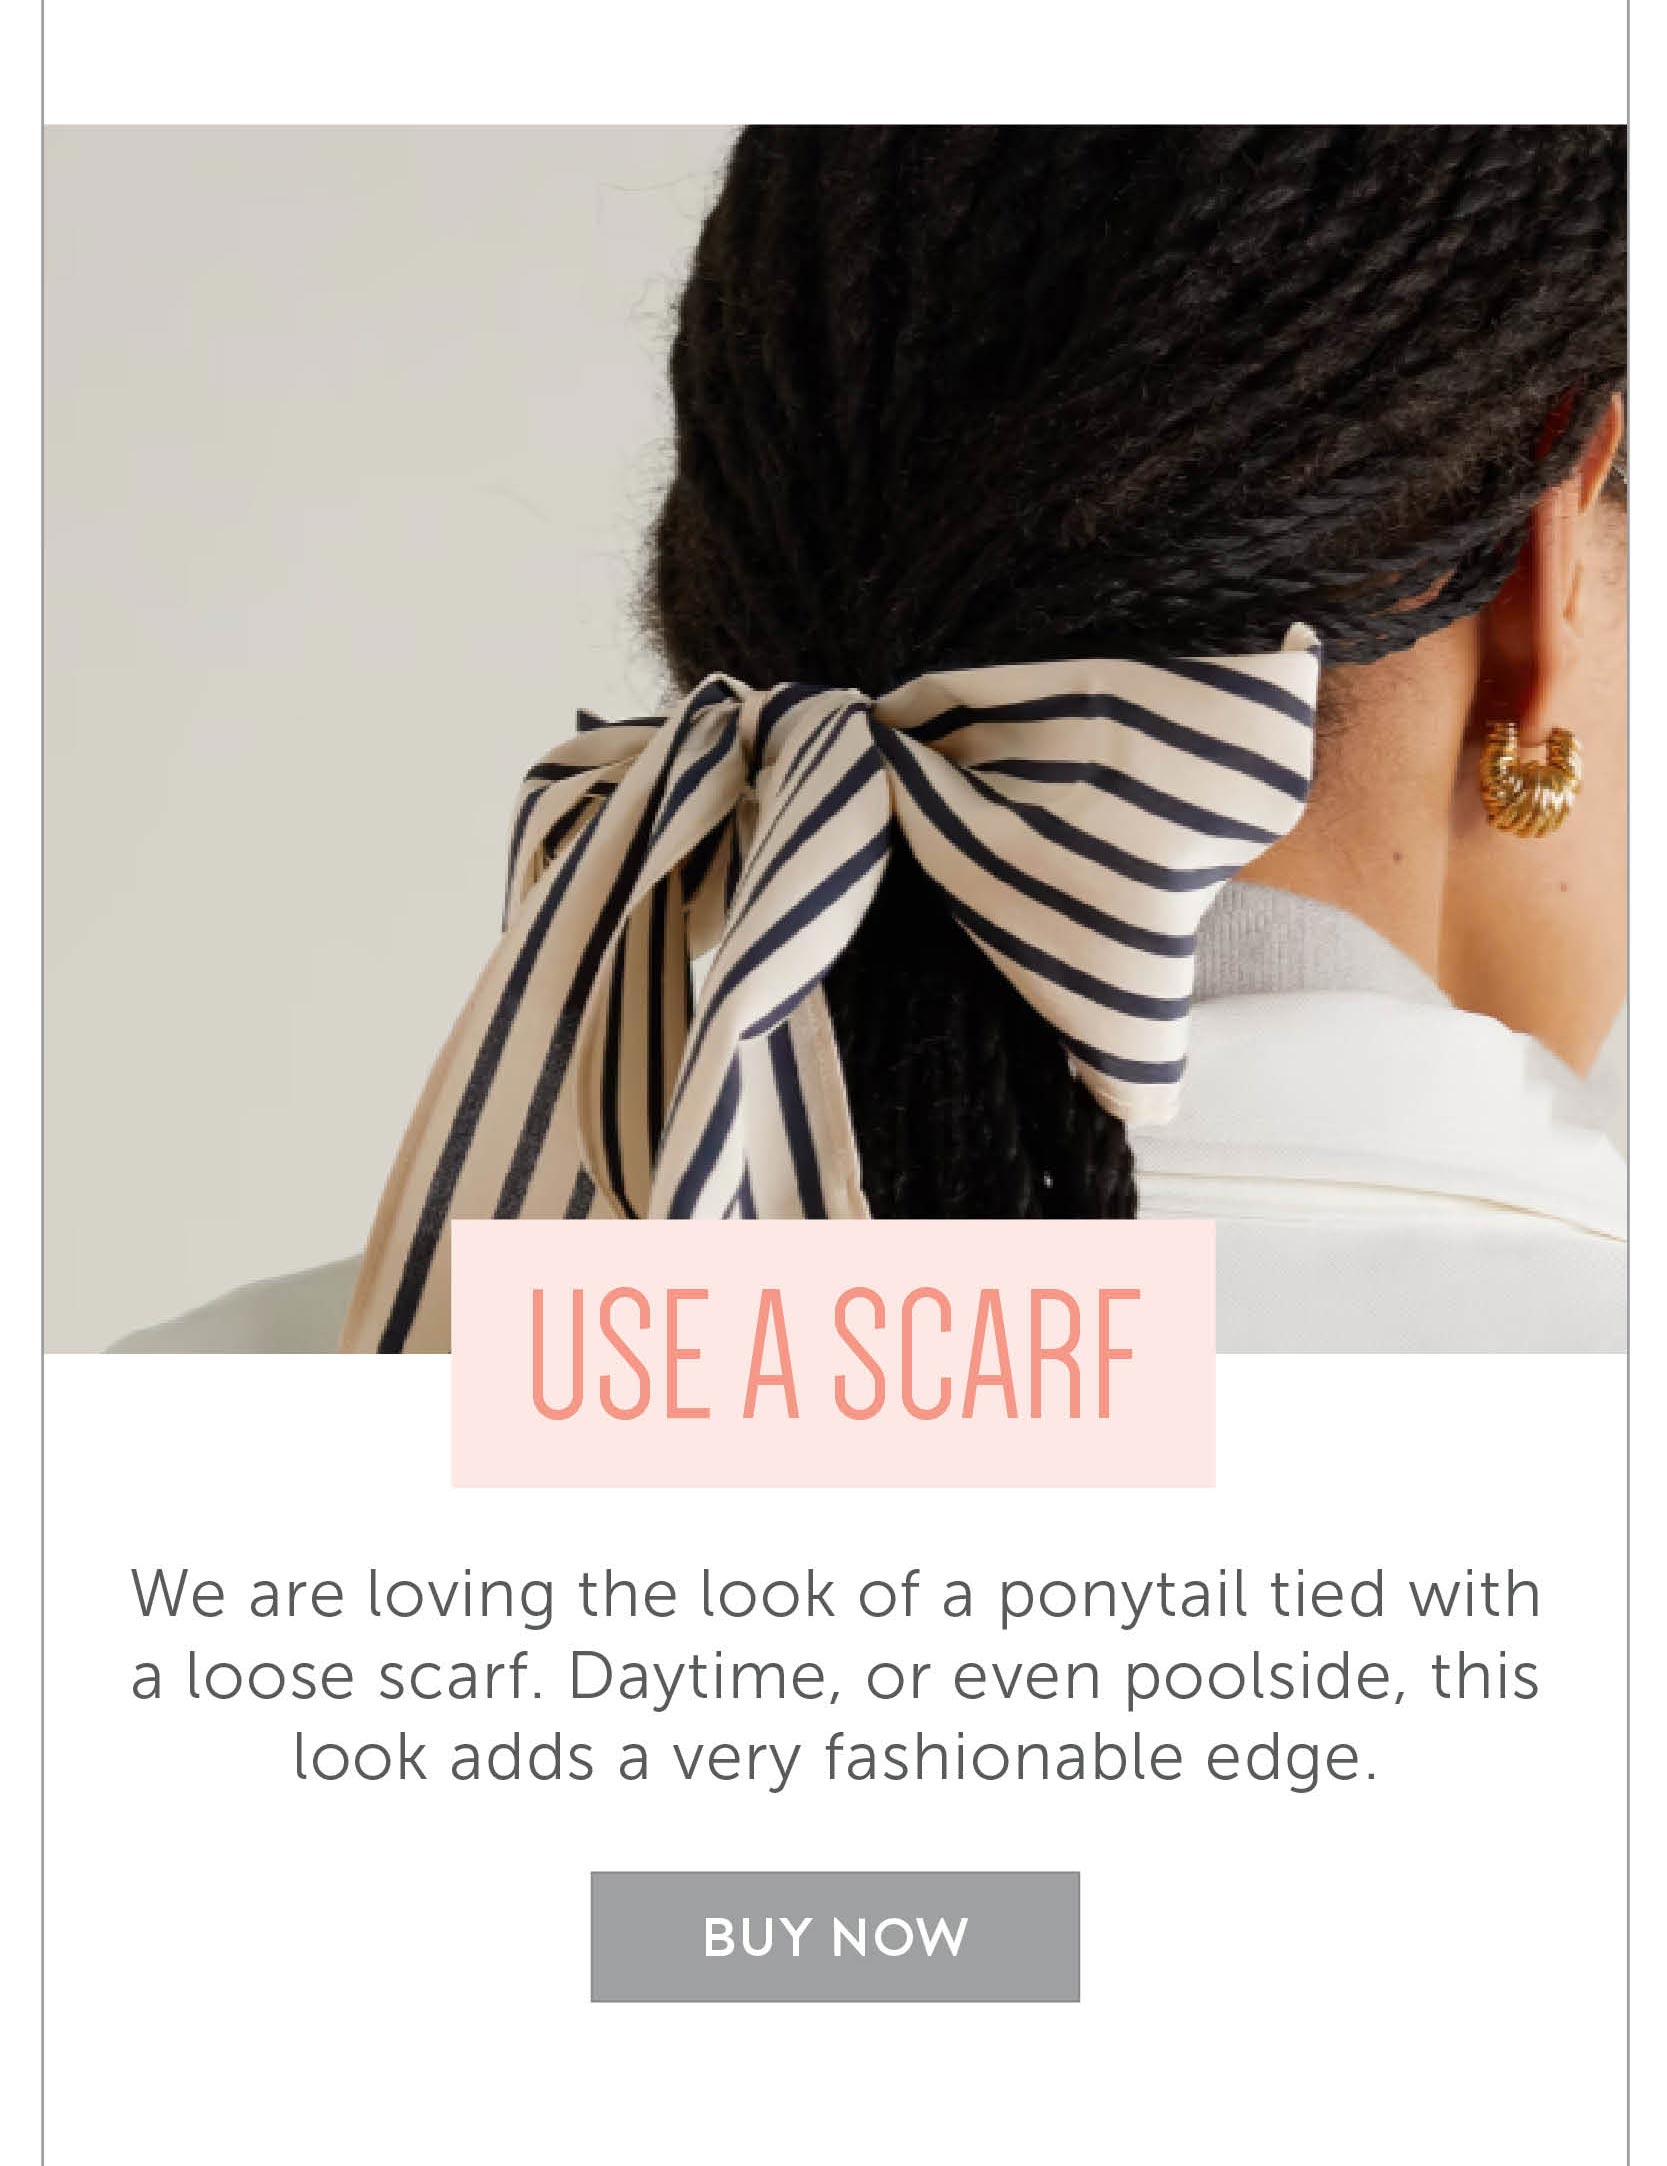 Use a scarf! We are loving the look of a ponytail tied with a loose scarf. Daytime, or even poolside, this look adds a very fashionable edge. 